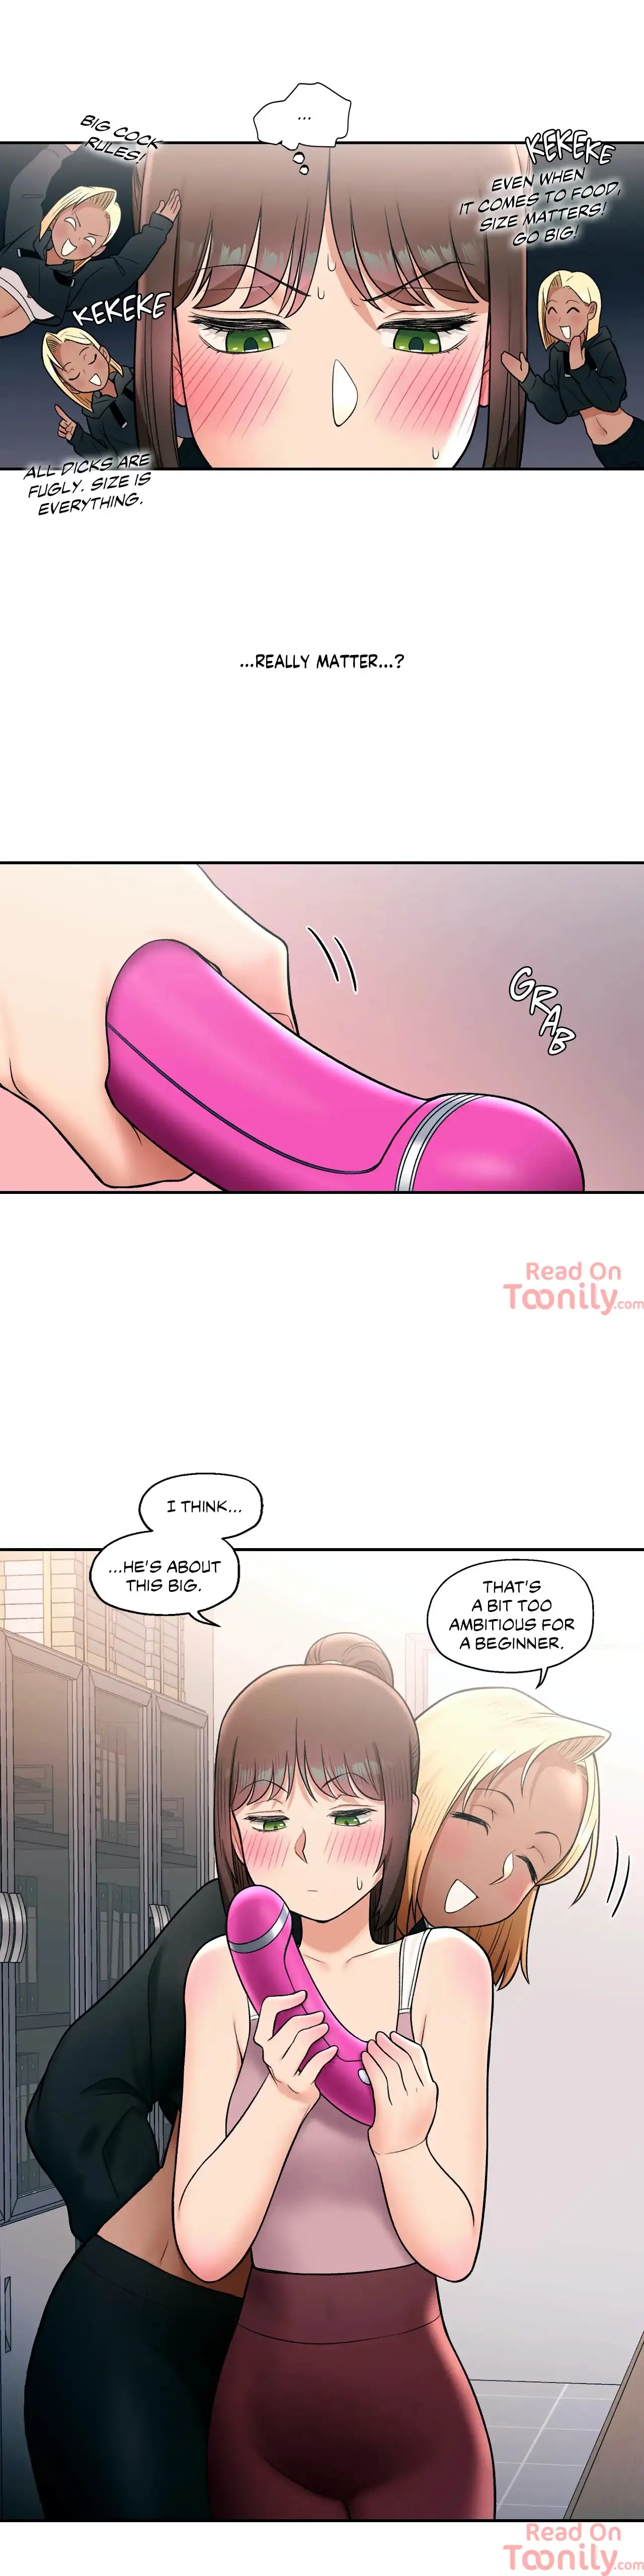 Sexercise - Chapter 30 Page 2